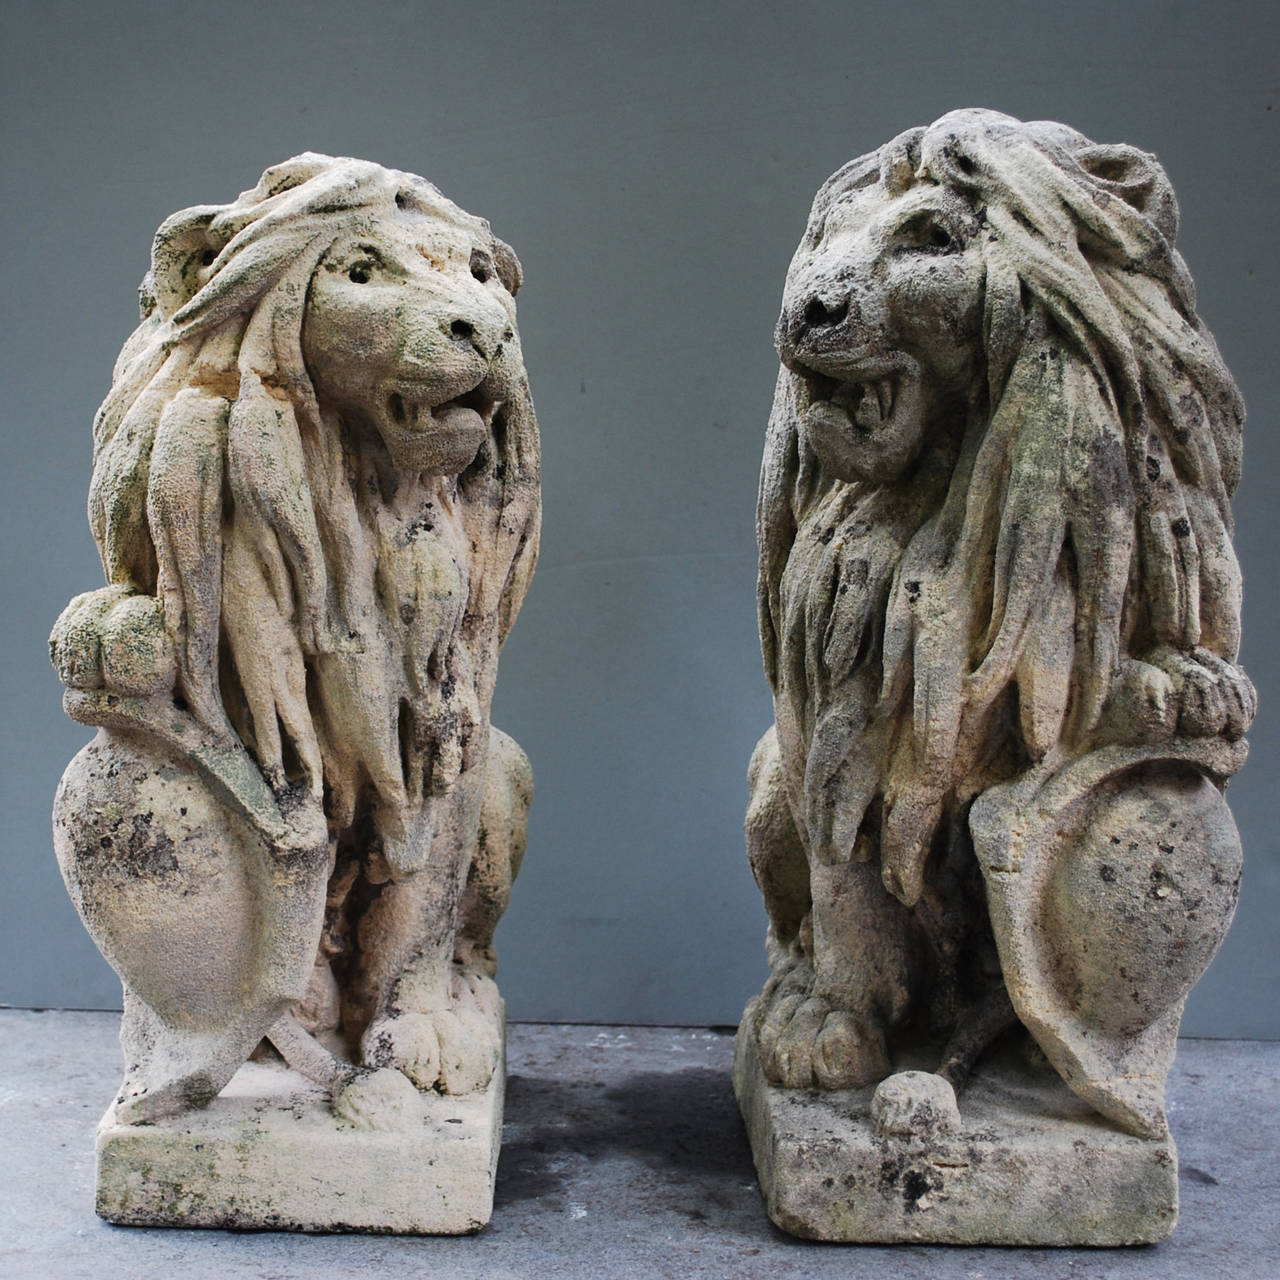 Pair of 20th century. Sculpted sandstone lions.
Lions are not identical, 3 cm height difference.
Originates Italy, dating to circa 1920.
(Shipping costs on request, depends on destination).